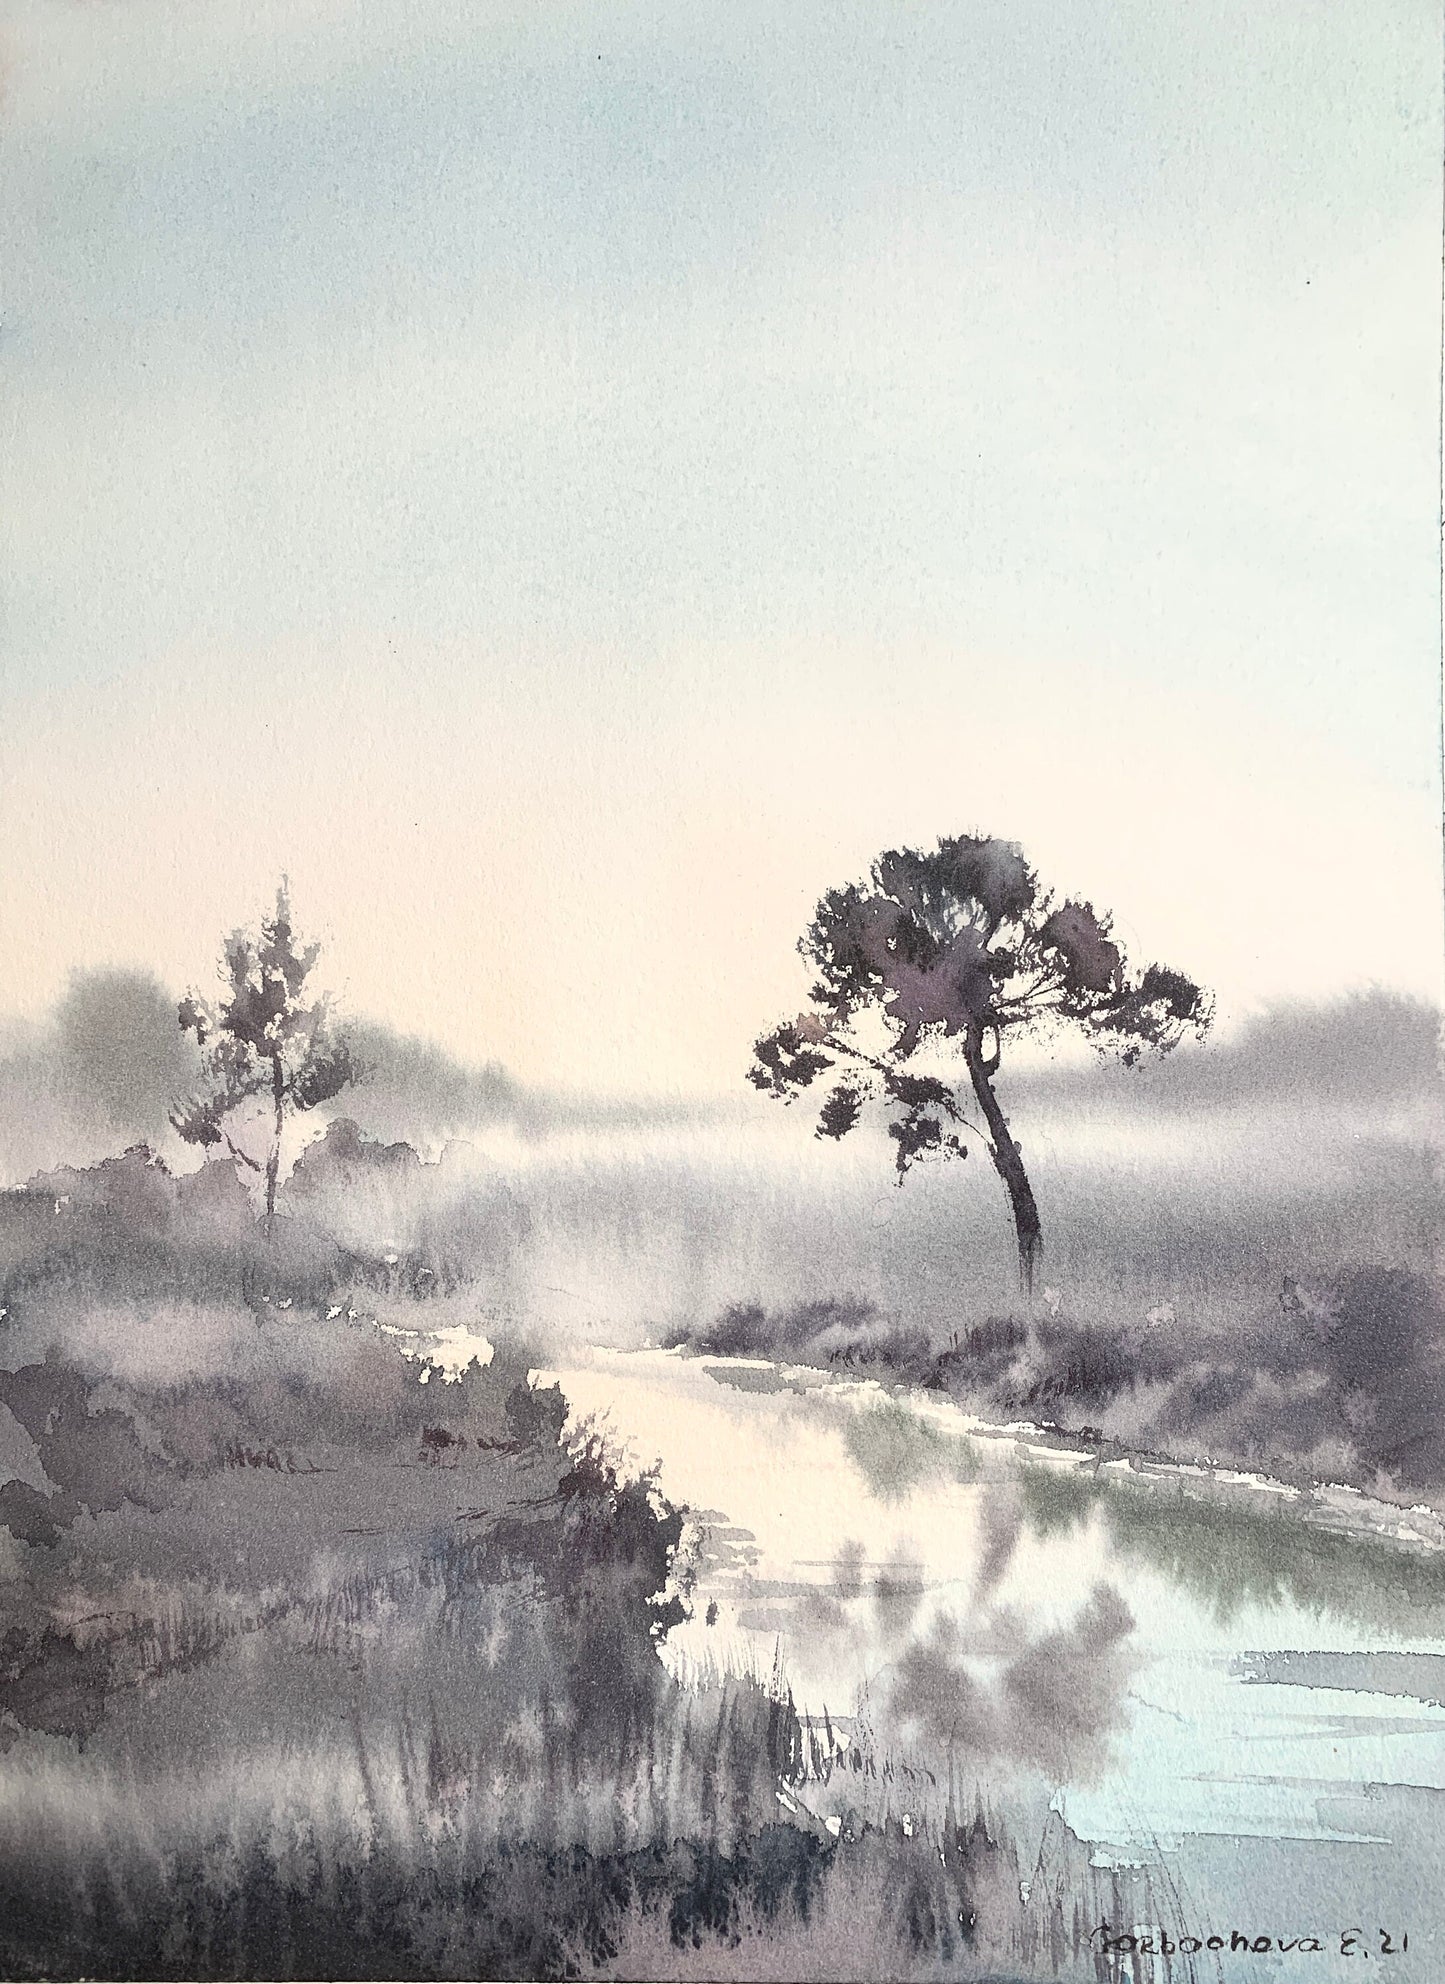 Small Watercolour Painting Original, Fog Morning Artwork, Country House Wall Decor, Landscape With Grey River, Gift